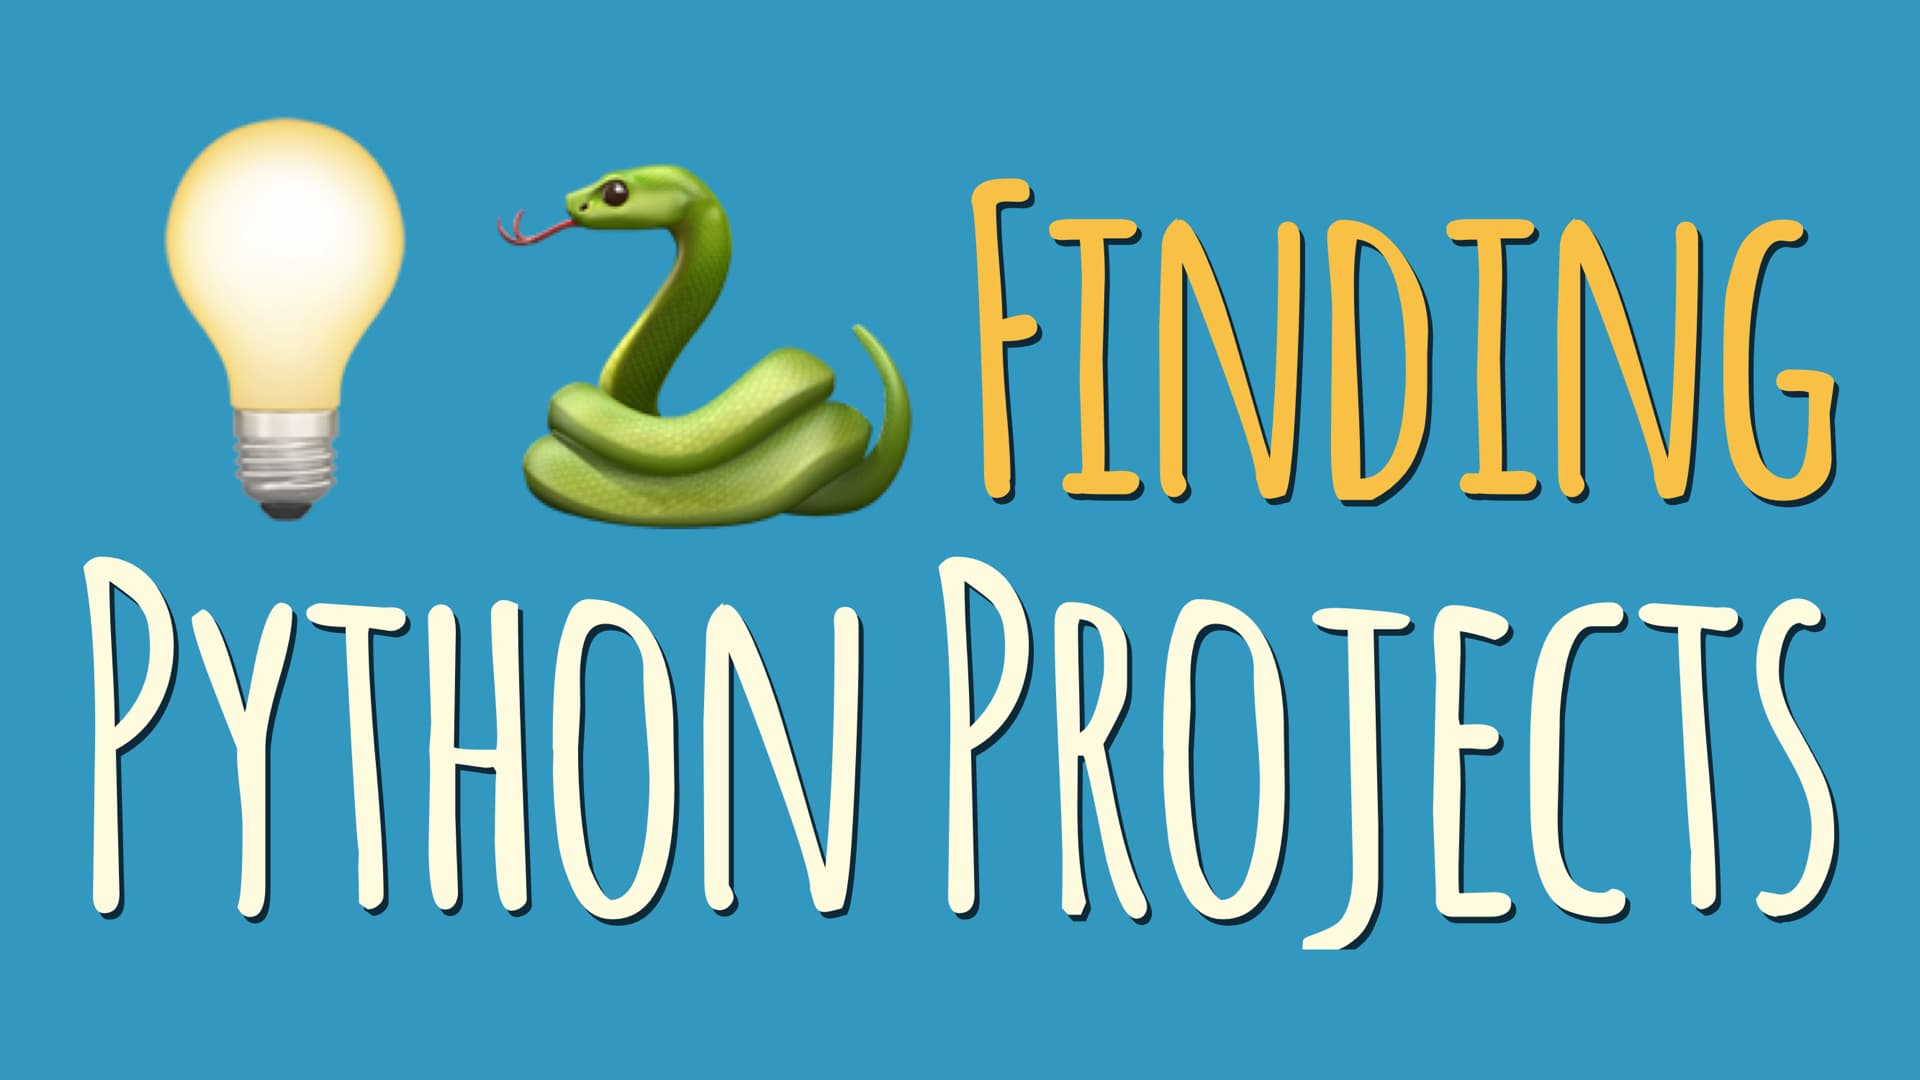 Finding Python Projects to Grow Your Programming Skills